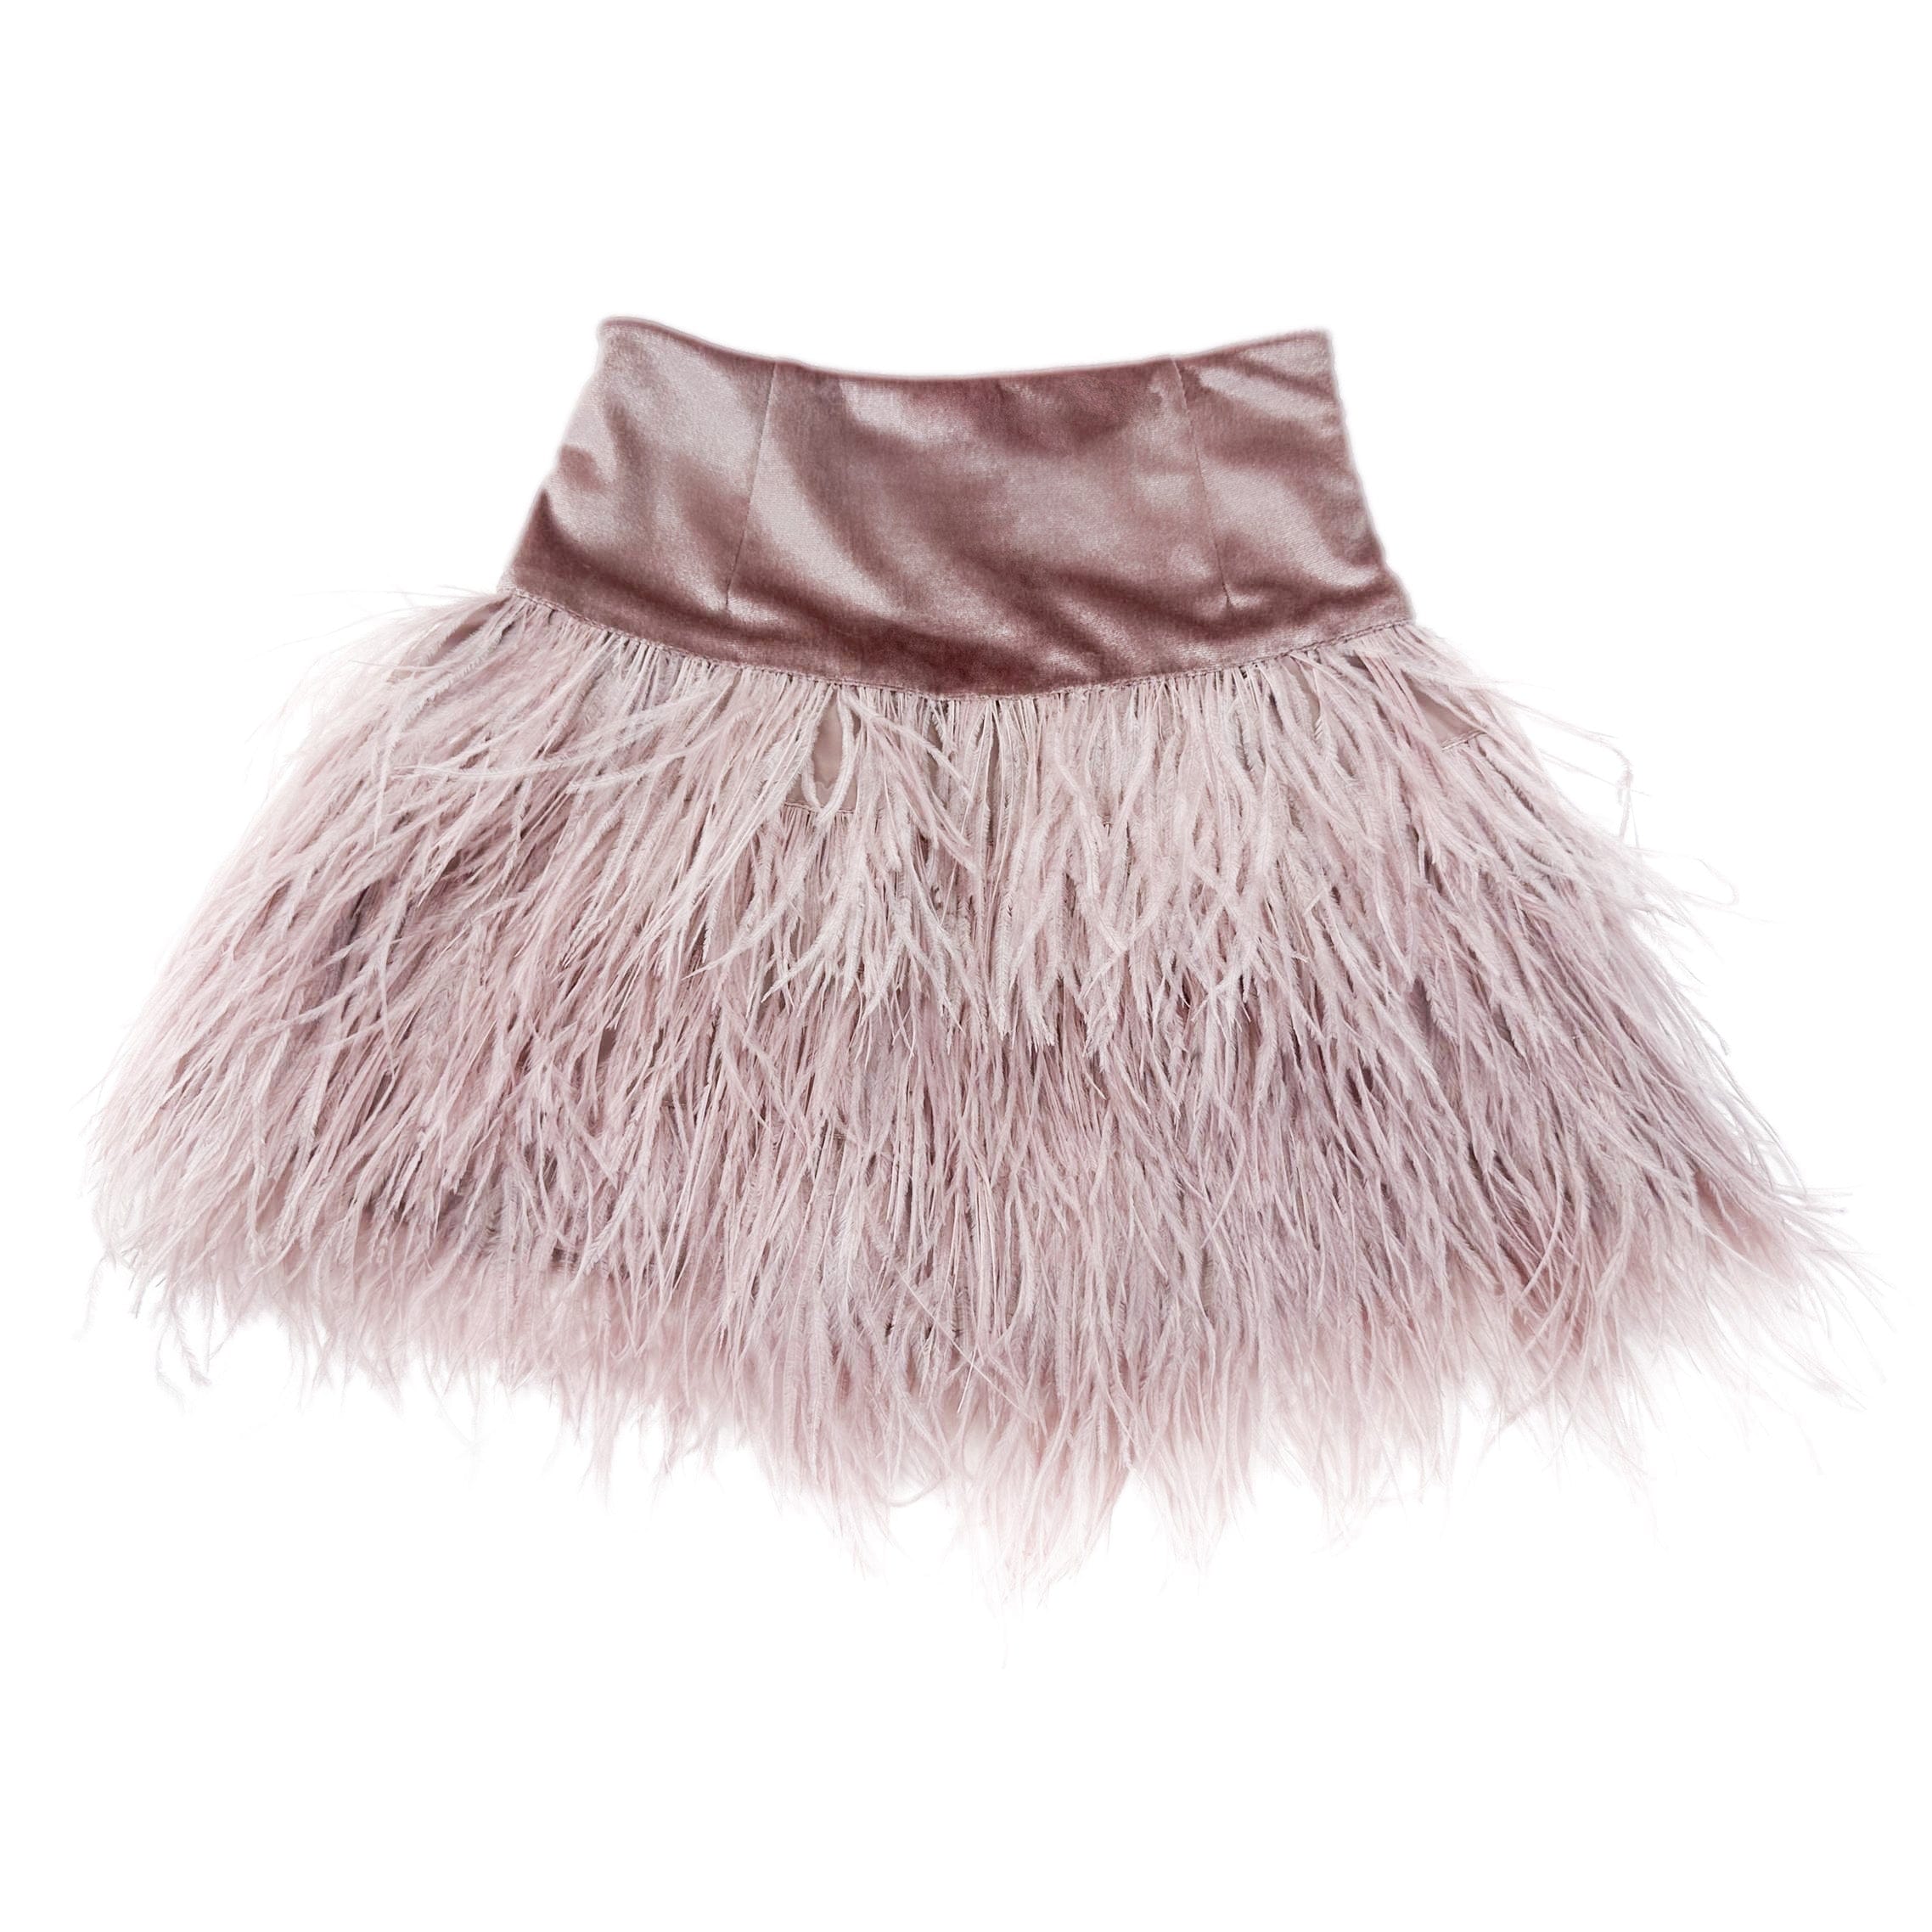 Petite Maison Kids Girl's Dusty Pink Feather Skirt 5 Years